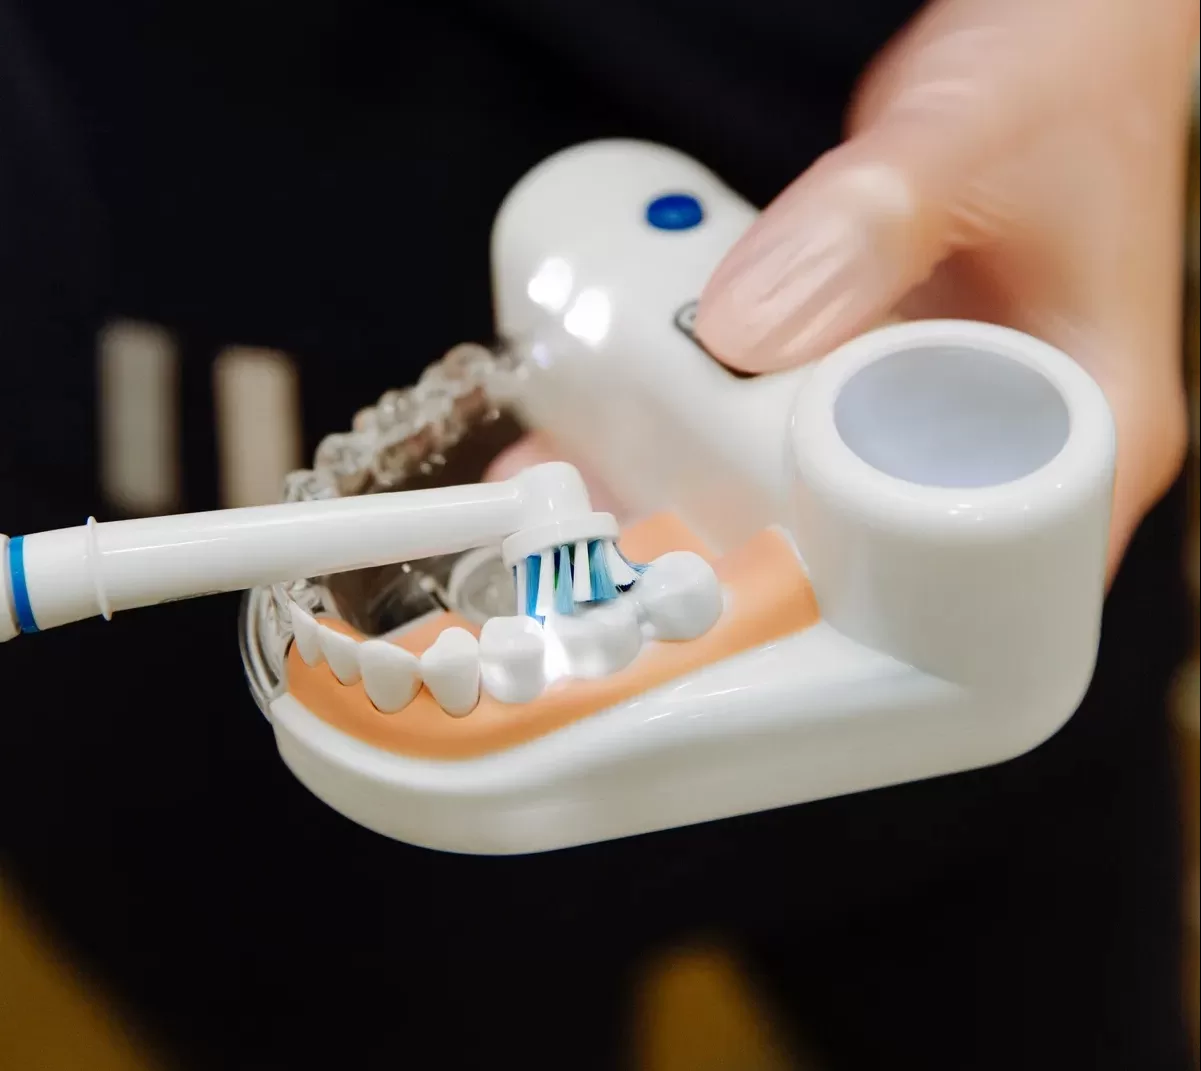 Electric toothbrushes are gentle on the gums